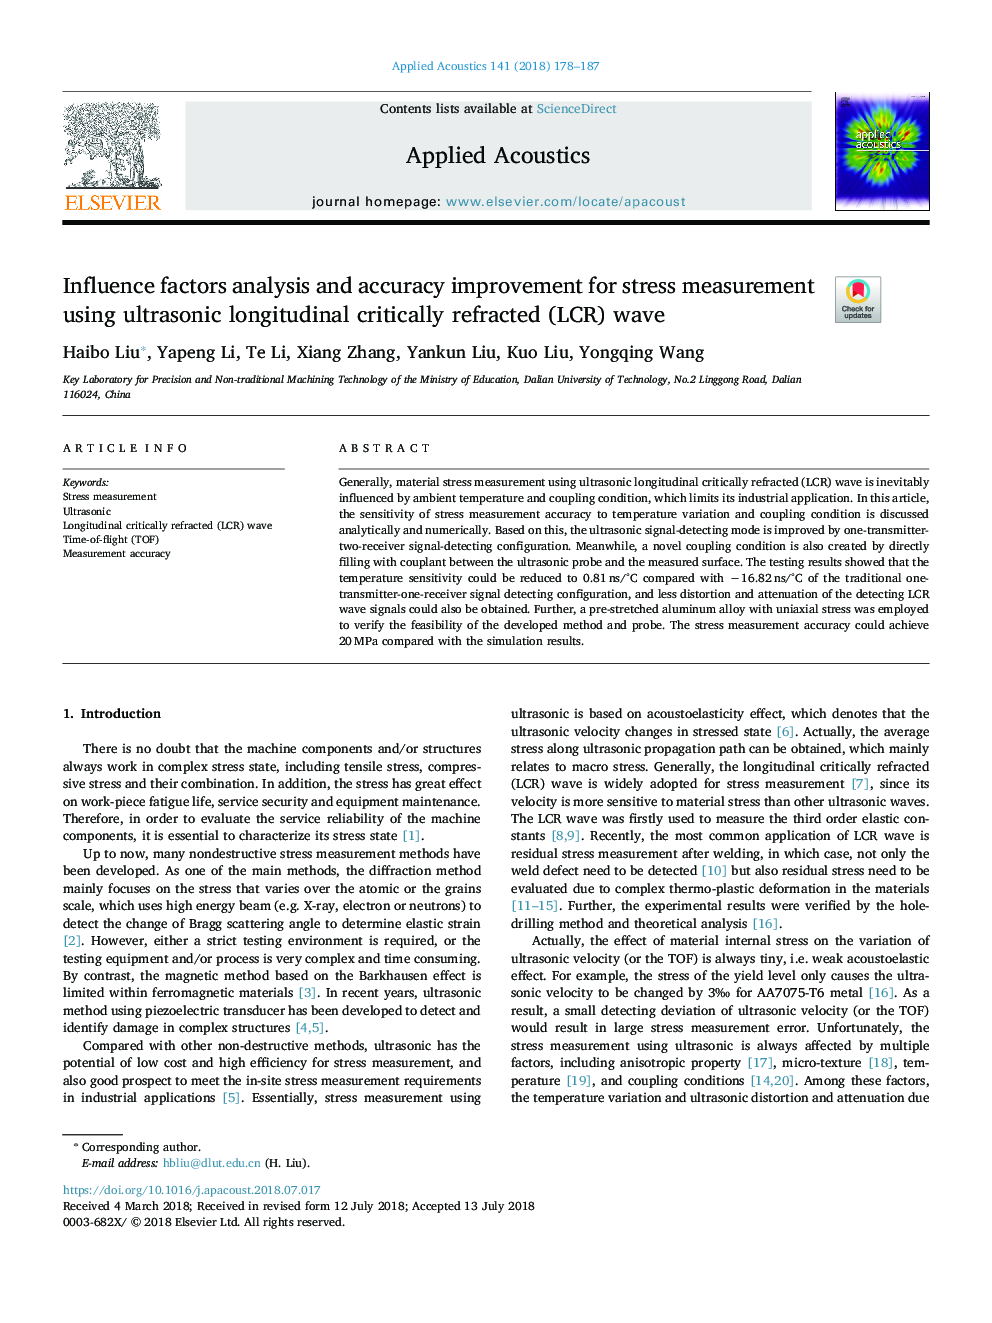 Influence factors analysis and accuracy improvement for stress measurement using ultrasonic longitudinal critically refracted (LCR) wave